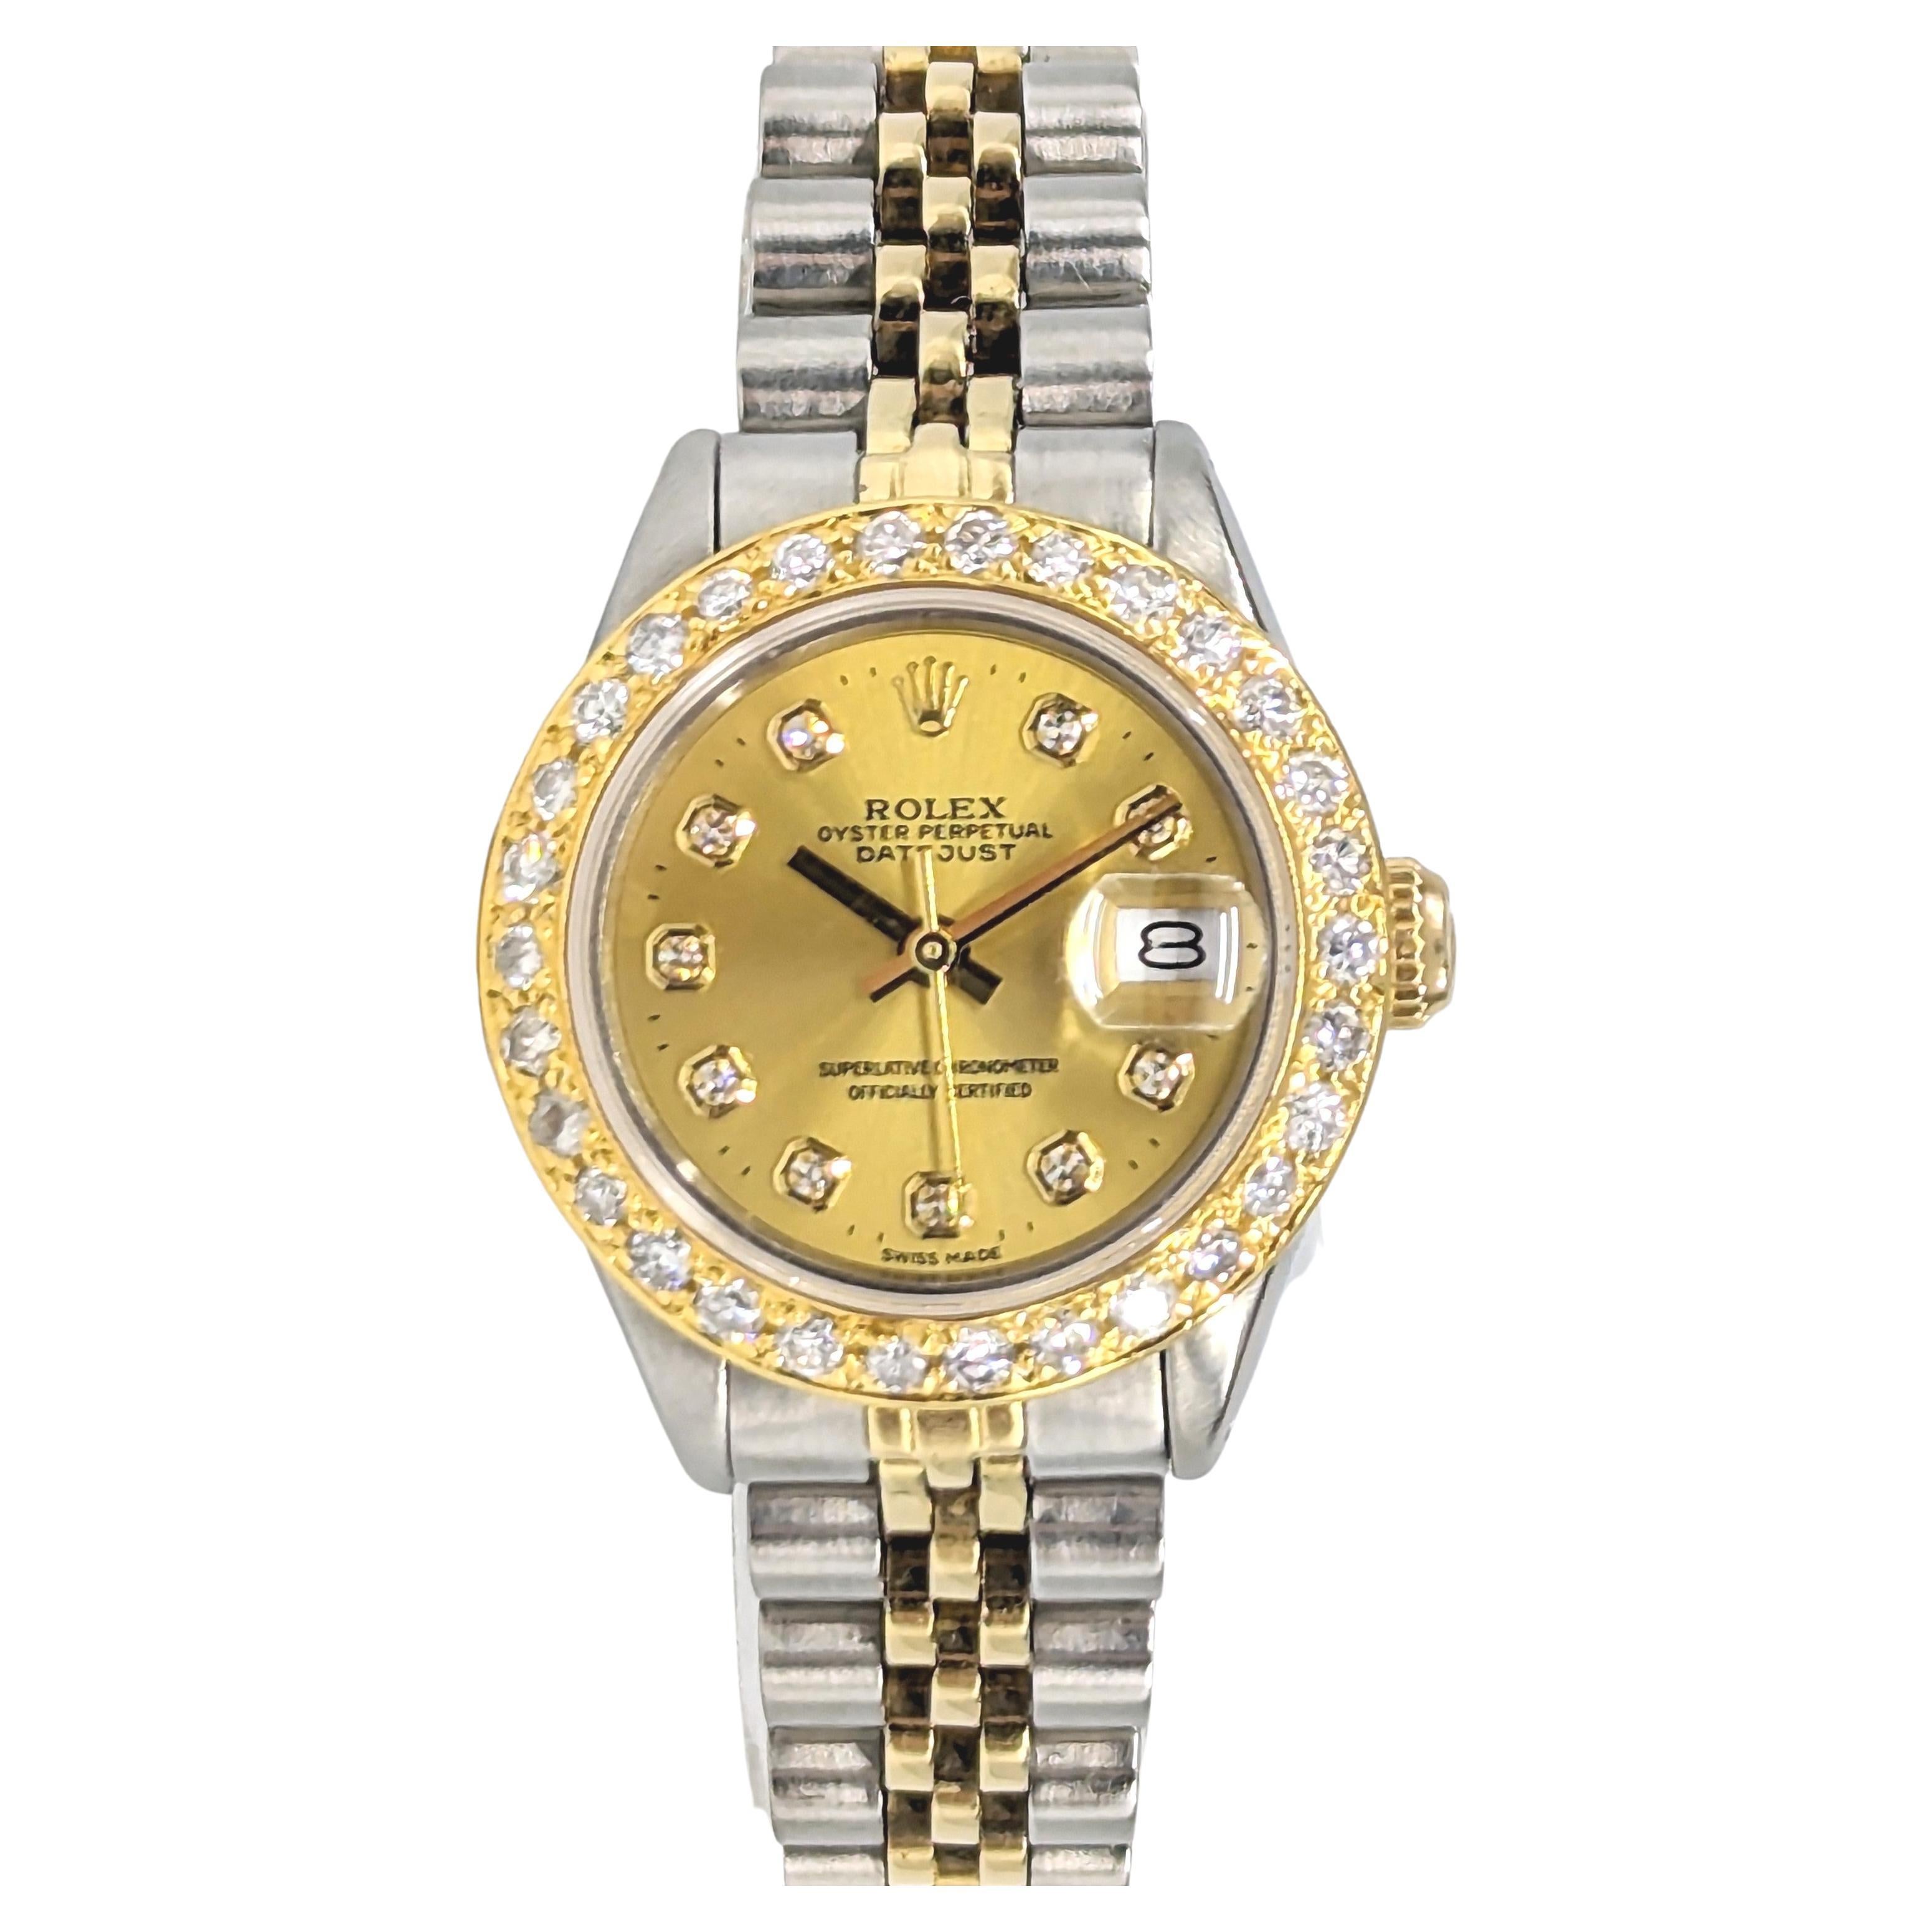 An elegant ladies Rolex in 2 tone yellow gold and stainless steel, with a 2 tone Rolex jubilee bracelet. The dial is gold, custom set with aftermarket diamond markers. The aftermarket bezel is solid gold, custom set with approx 1.3 ctw. of round cut